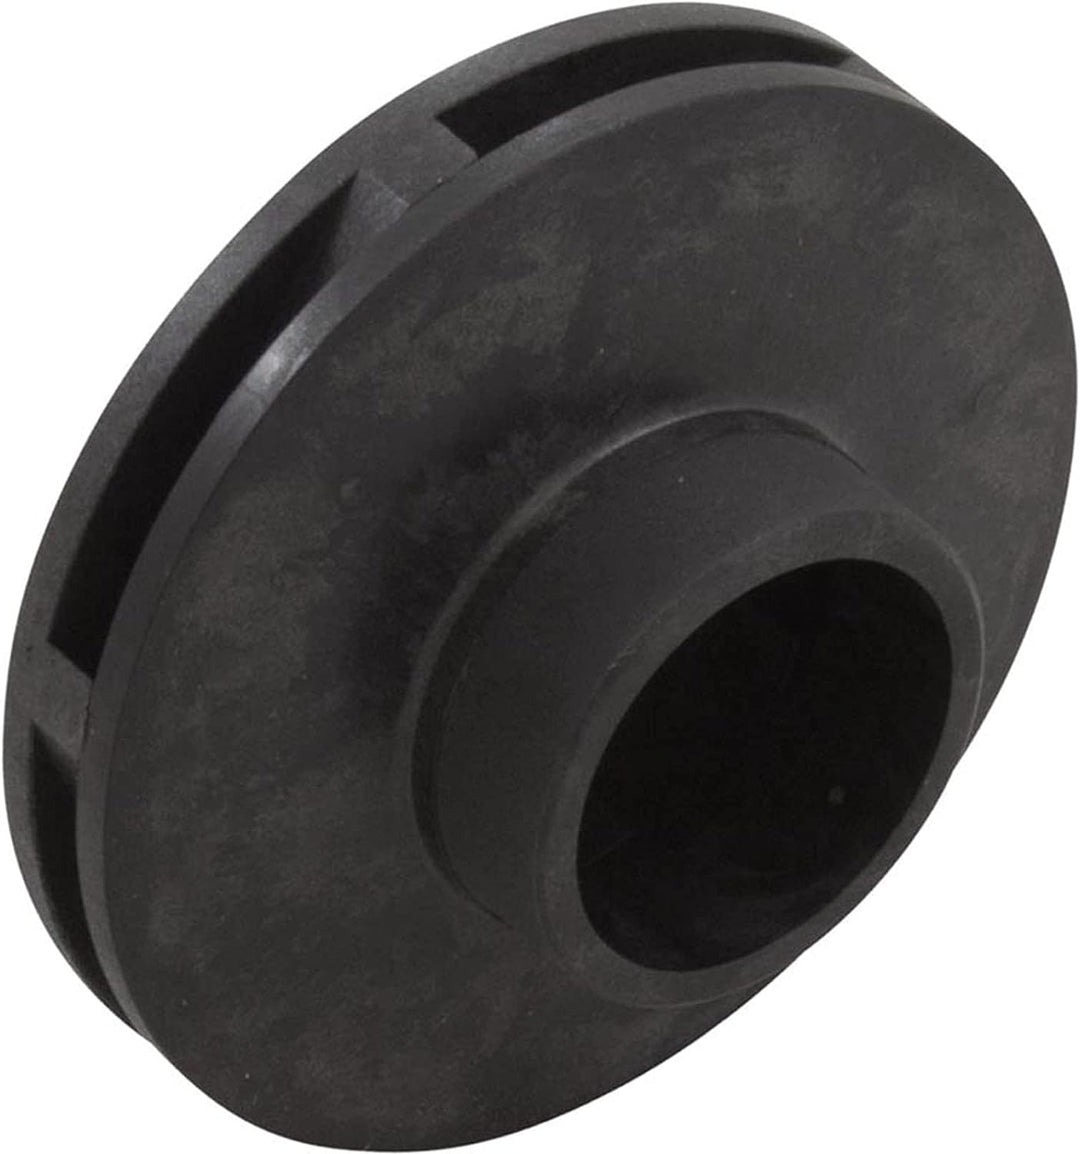 Jandy PlusHP .75 PHPF, 1.0 PHPM Impeller w/Screw, Backplate O-Ring